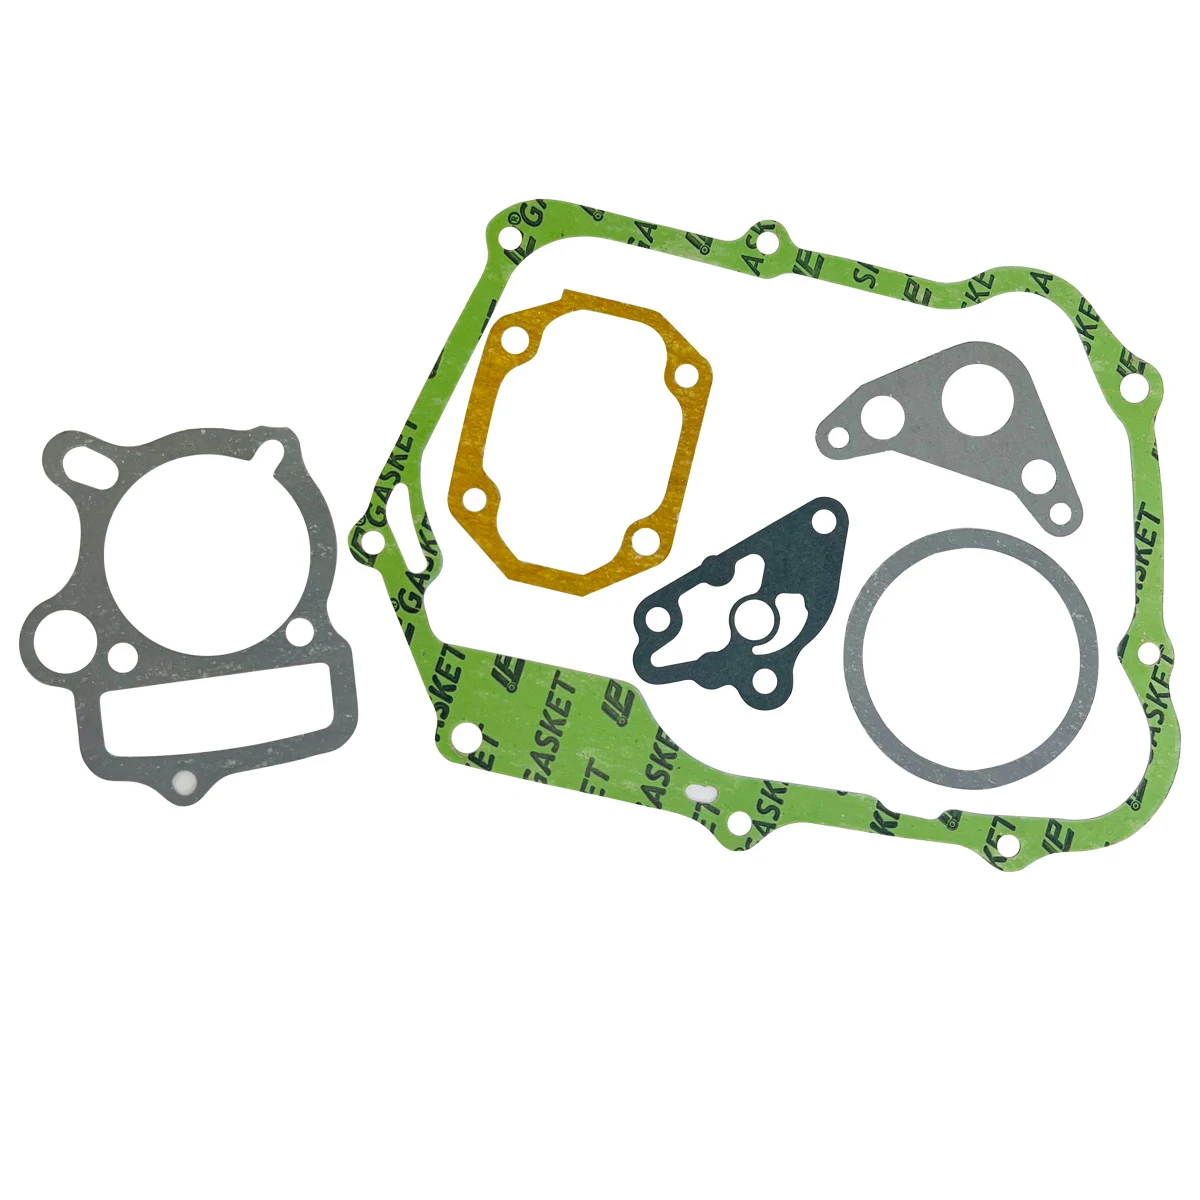 

LPOPR Motorcycle Cylinder Engine Cover Gasket Cover Kits For Honda XR70R 1997-2003 CT70 1977-1994 C70 1980-1983